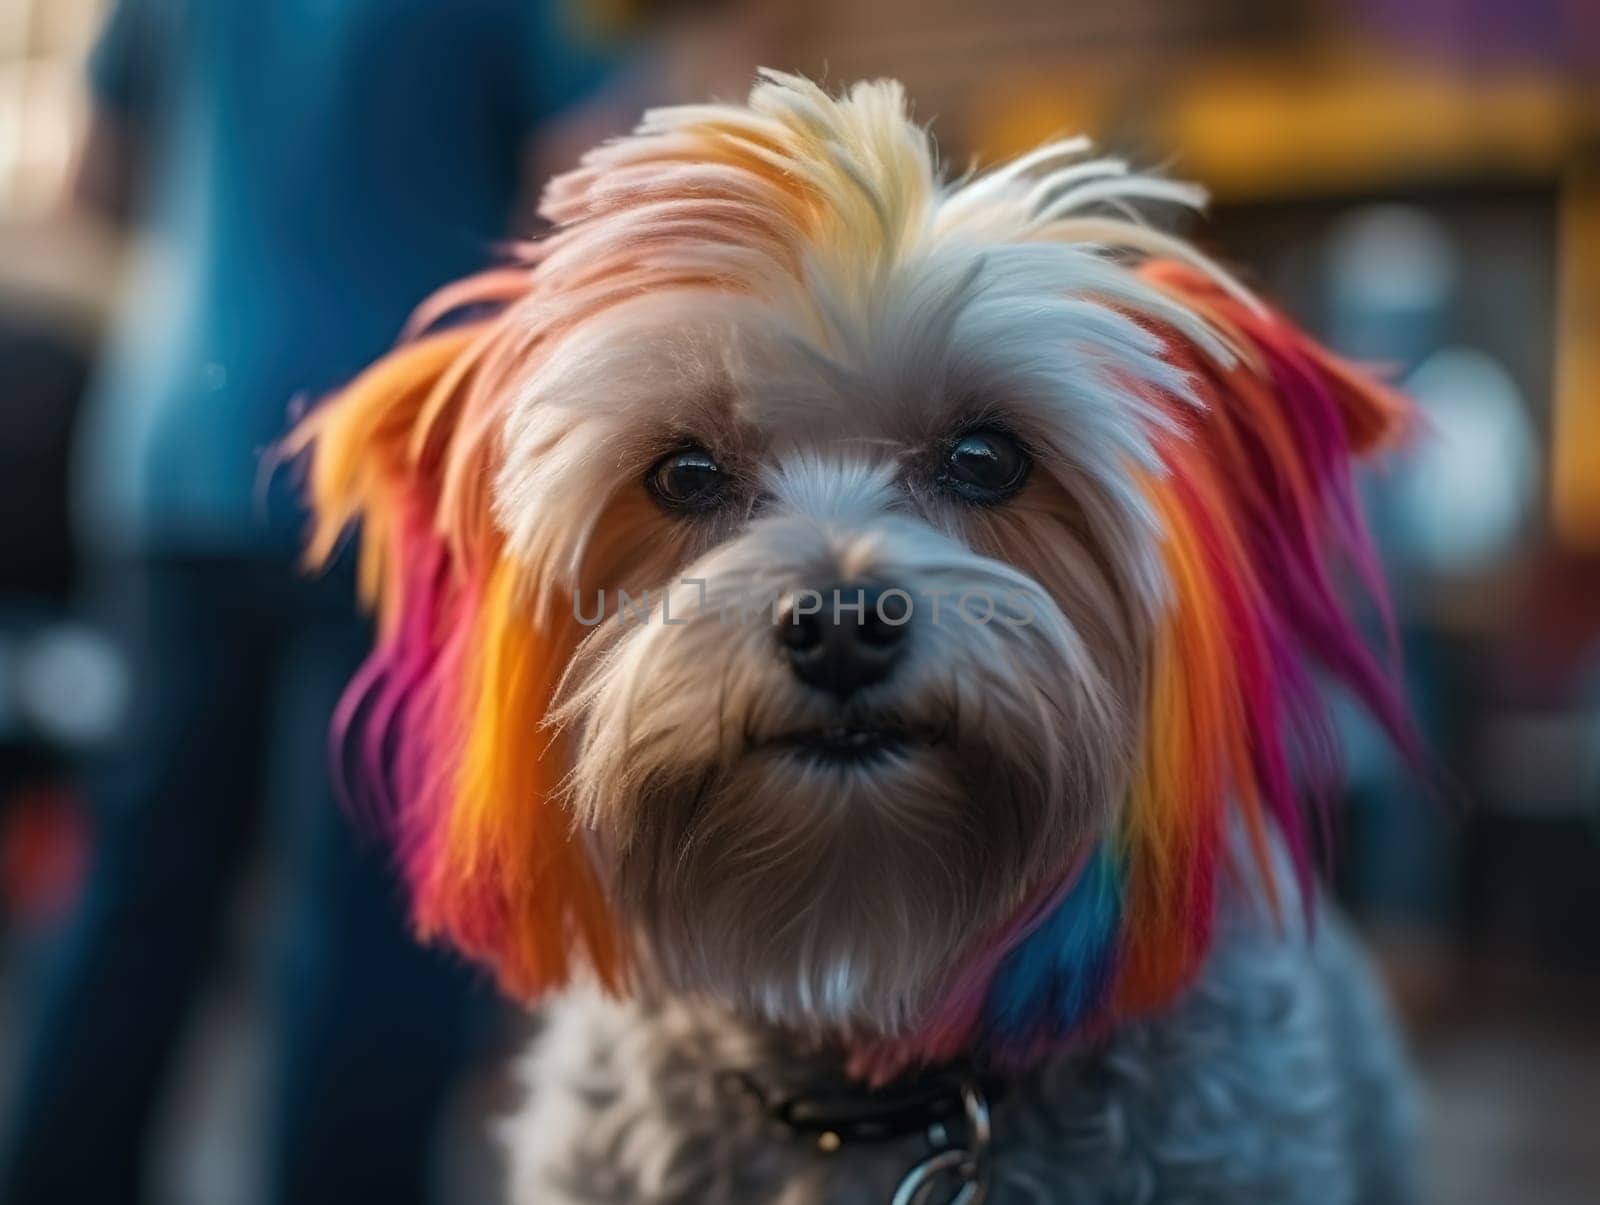 Cute Yorkshire Terrier With Colored Hair by tan4ikk1